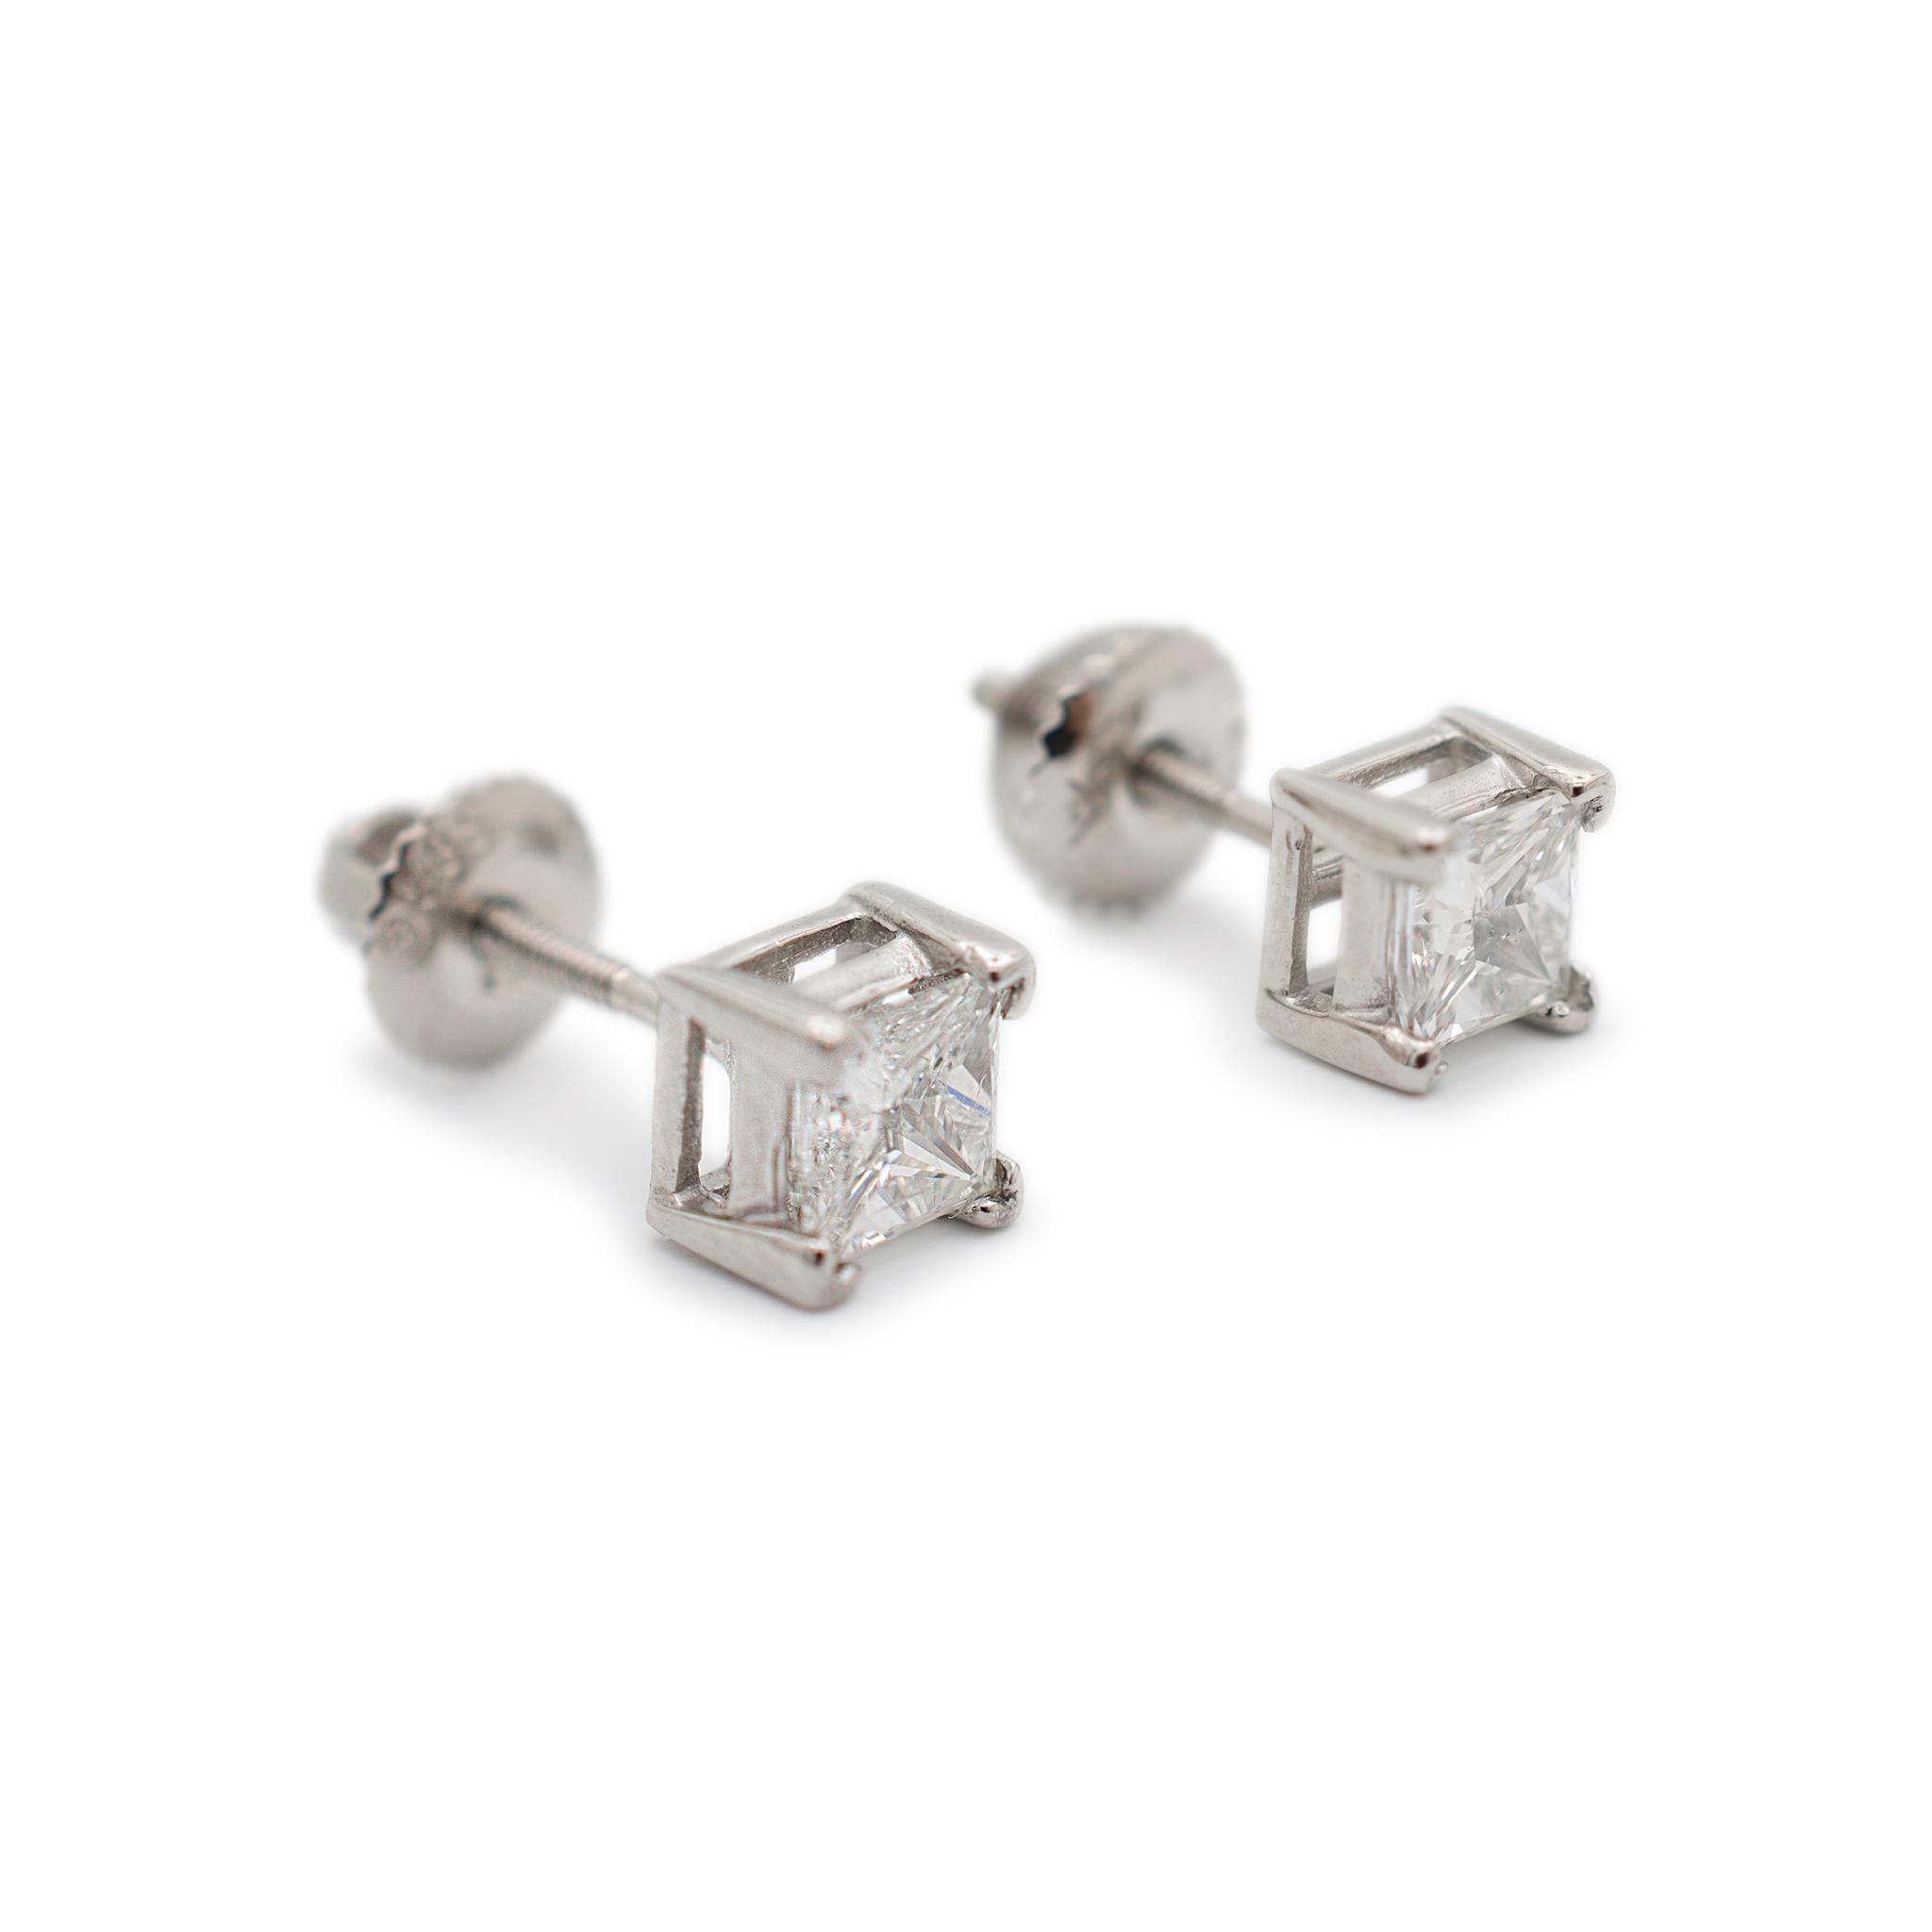 Ladies 14K White Gold 1.00CT Princess Cut Diamond Screw Back Stud Earrings In Excellent Condition For Sale In Houston, TX